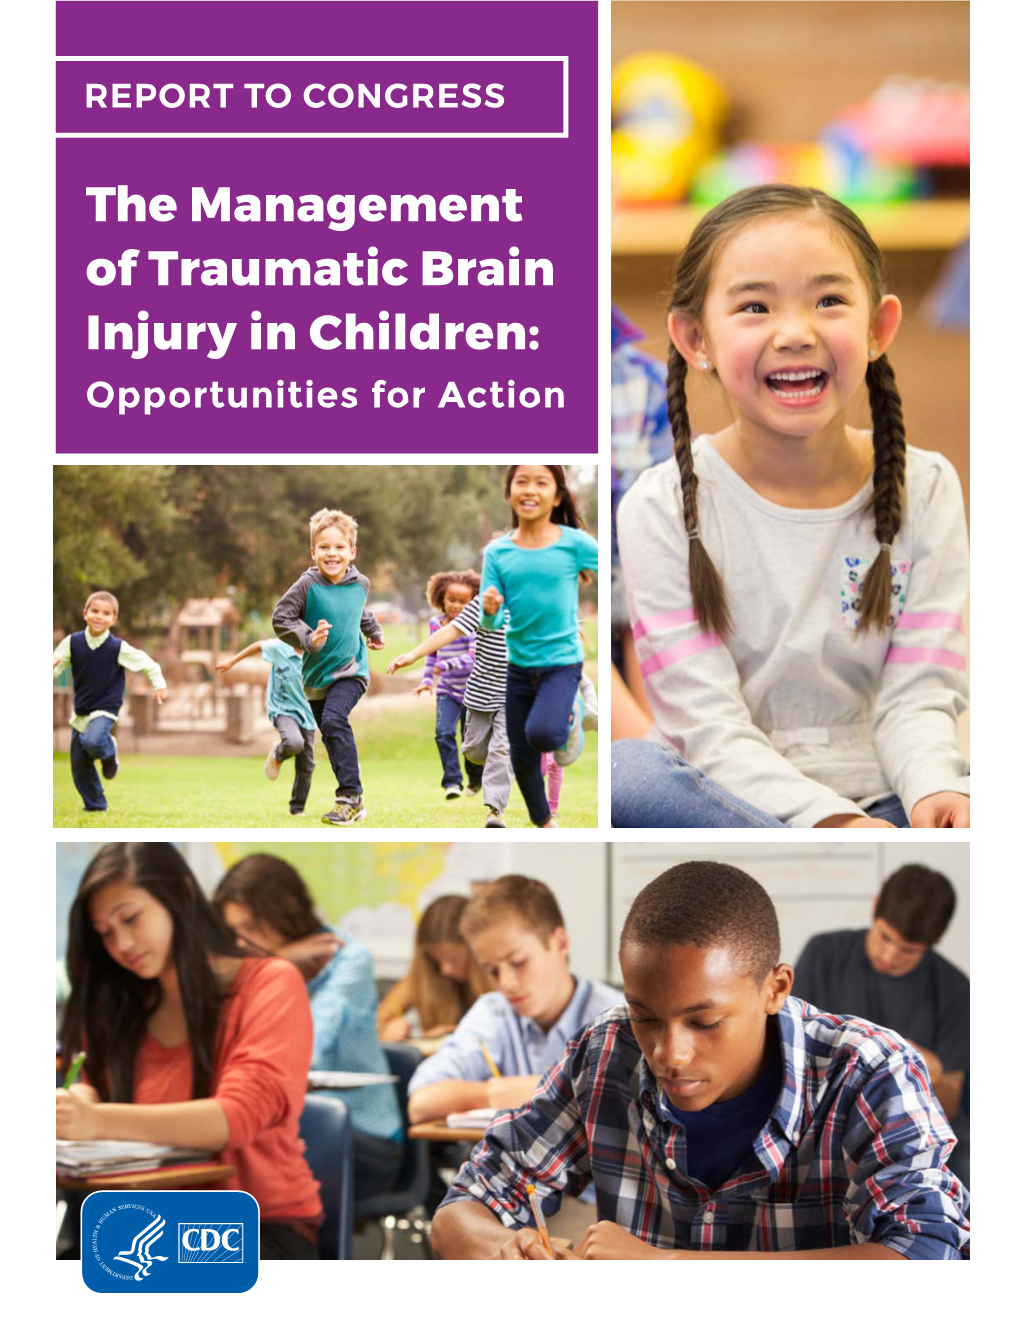 The Management of Traumatic Brain Injury in Children: Opportunities for Action SUBMITTED BY